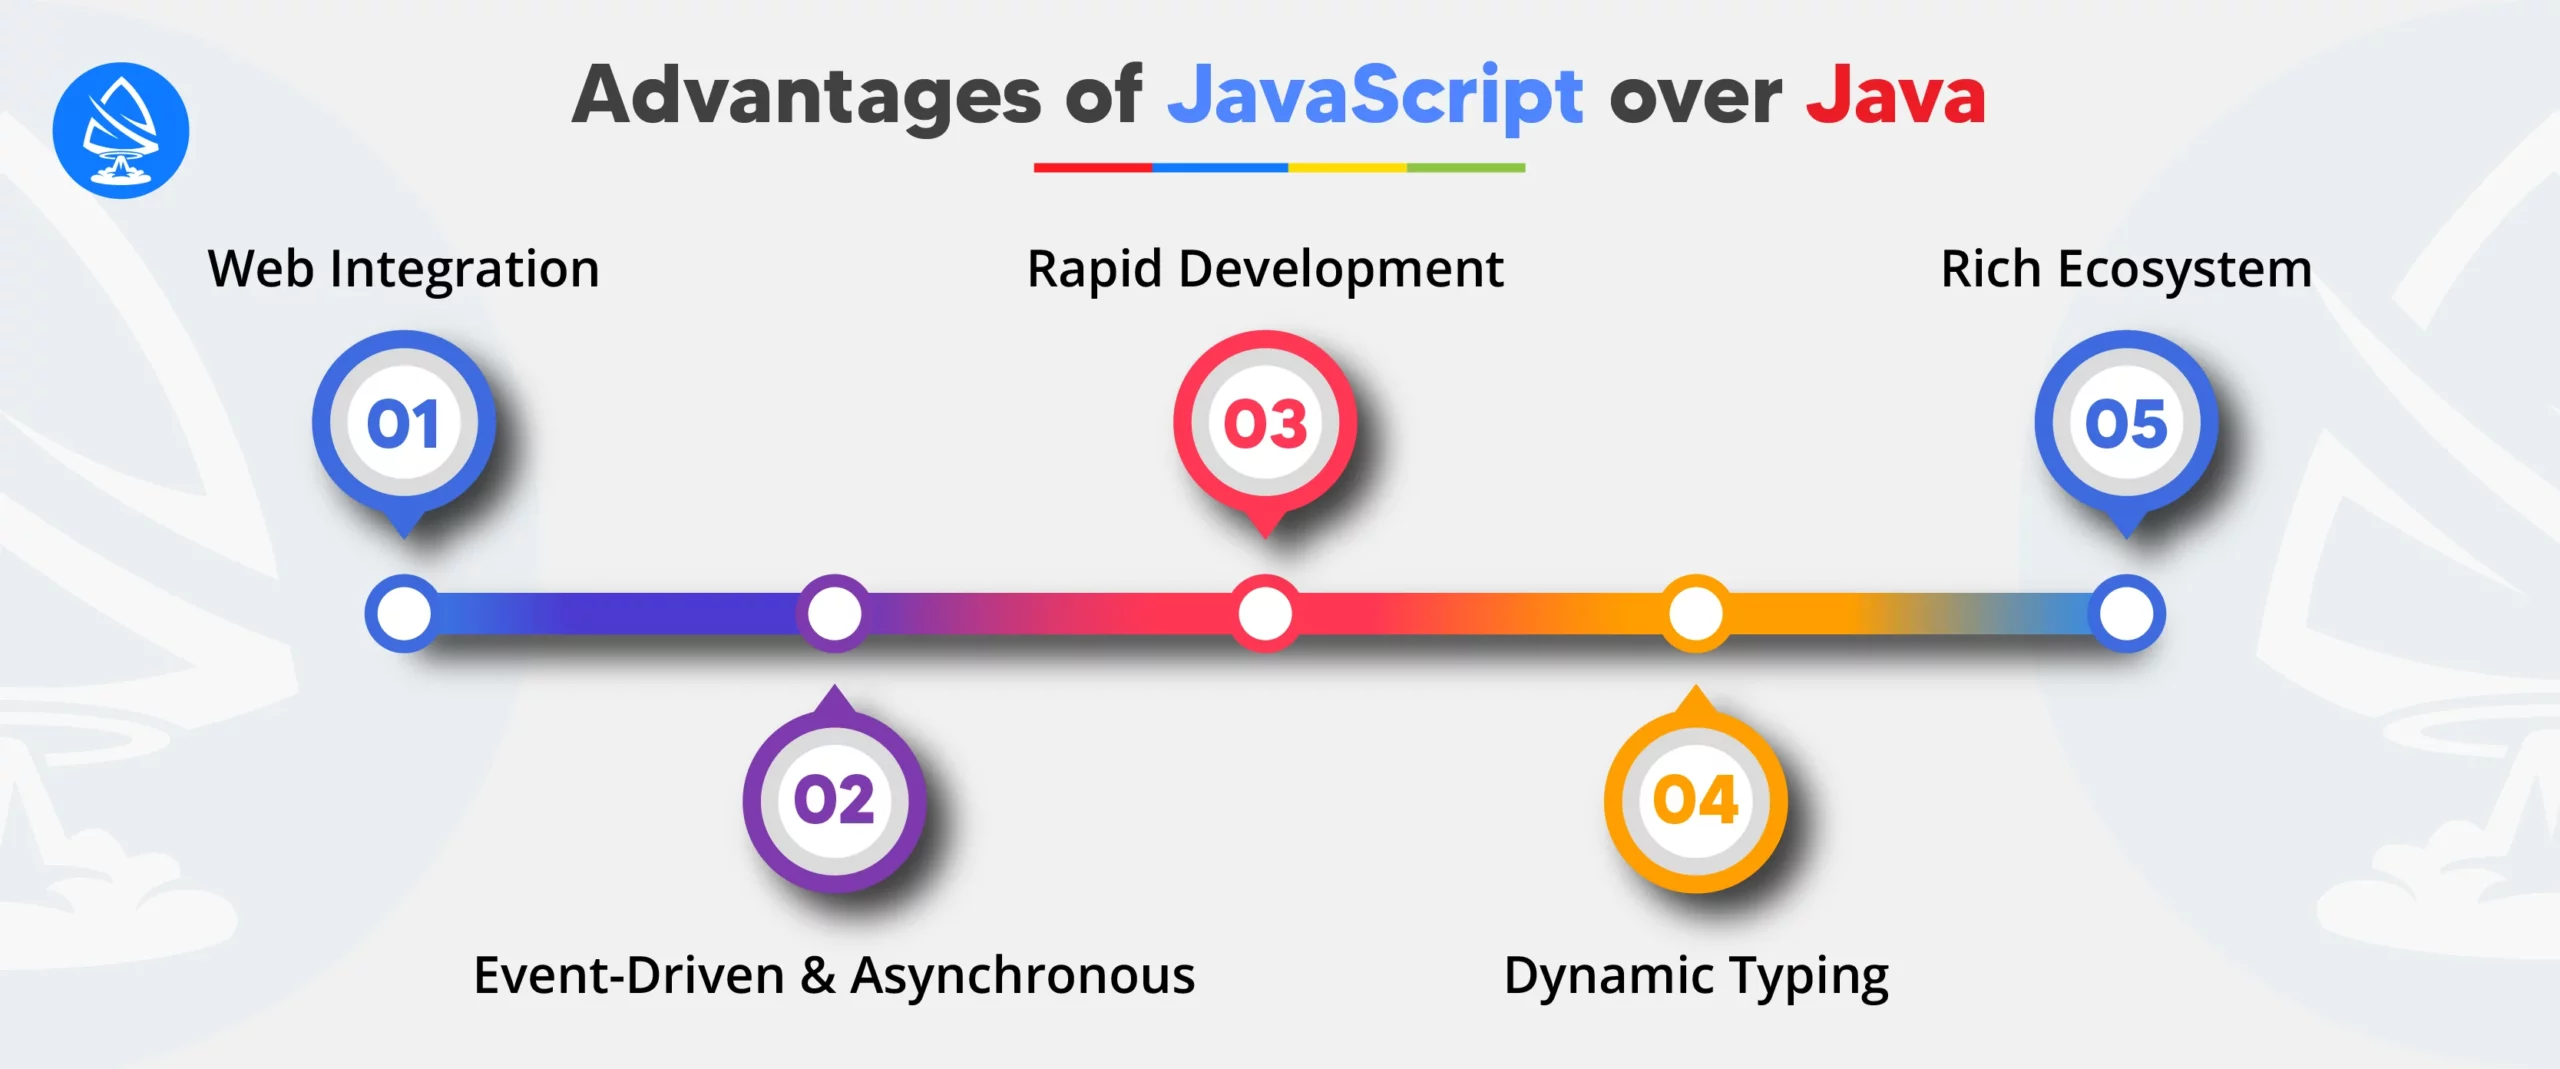 Advantages of JavaScript Compared to Java: